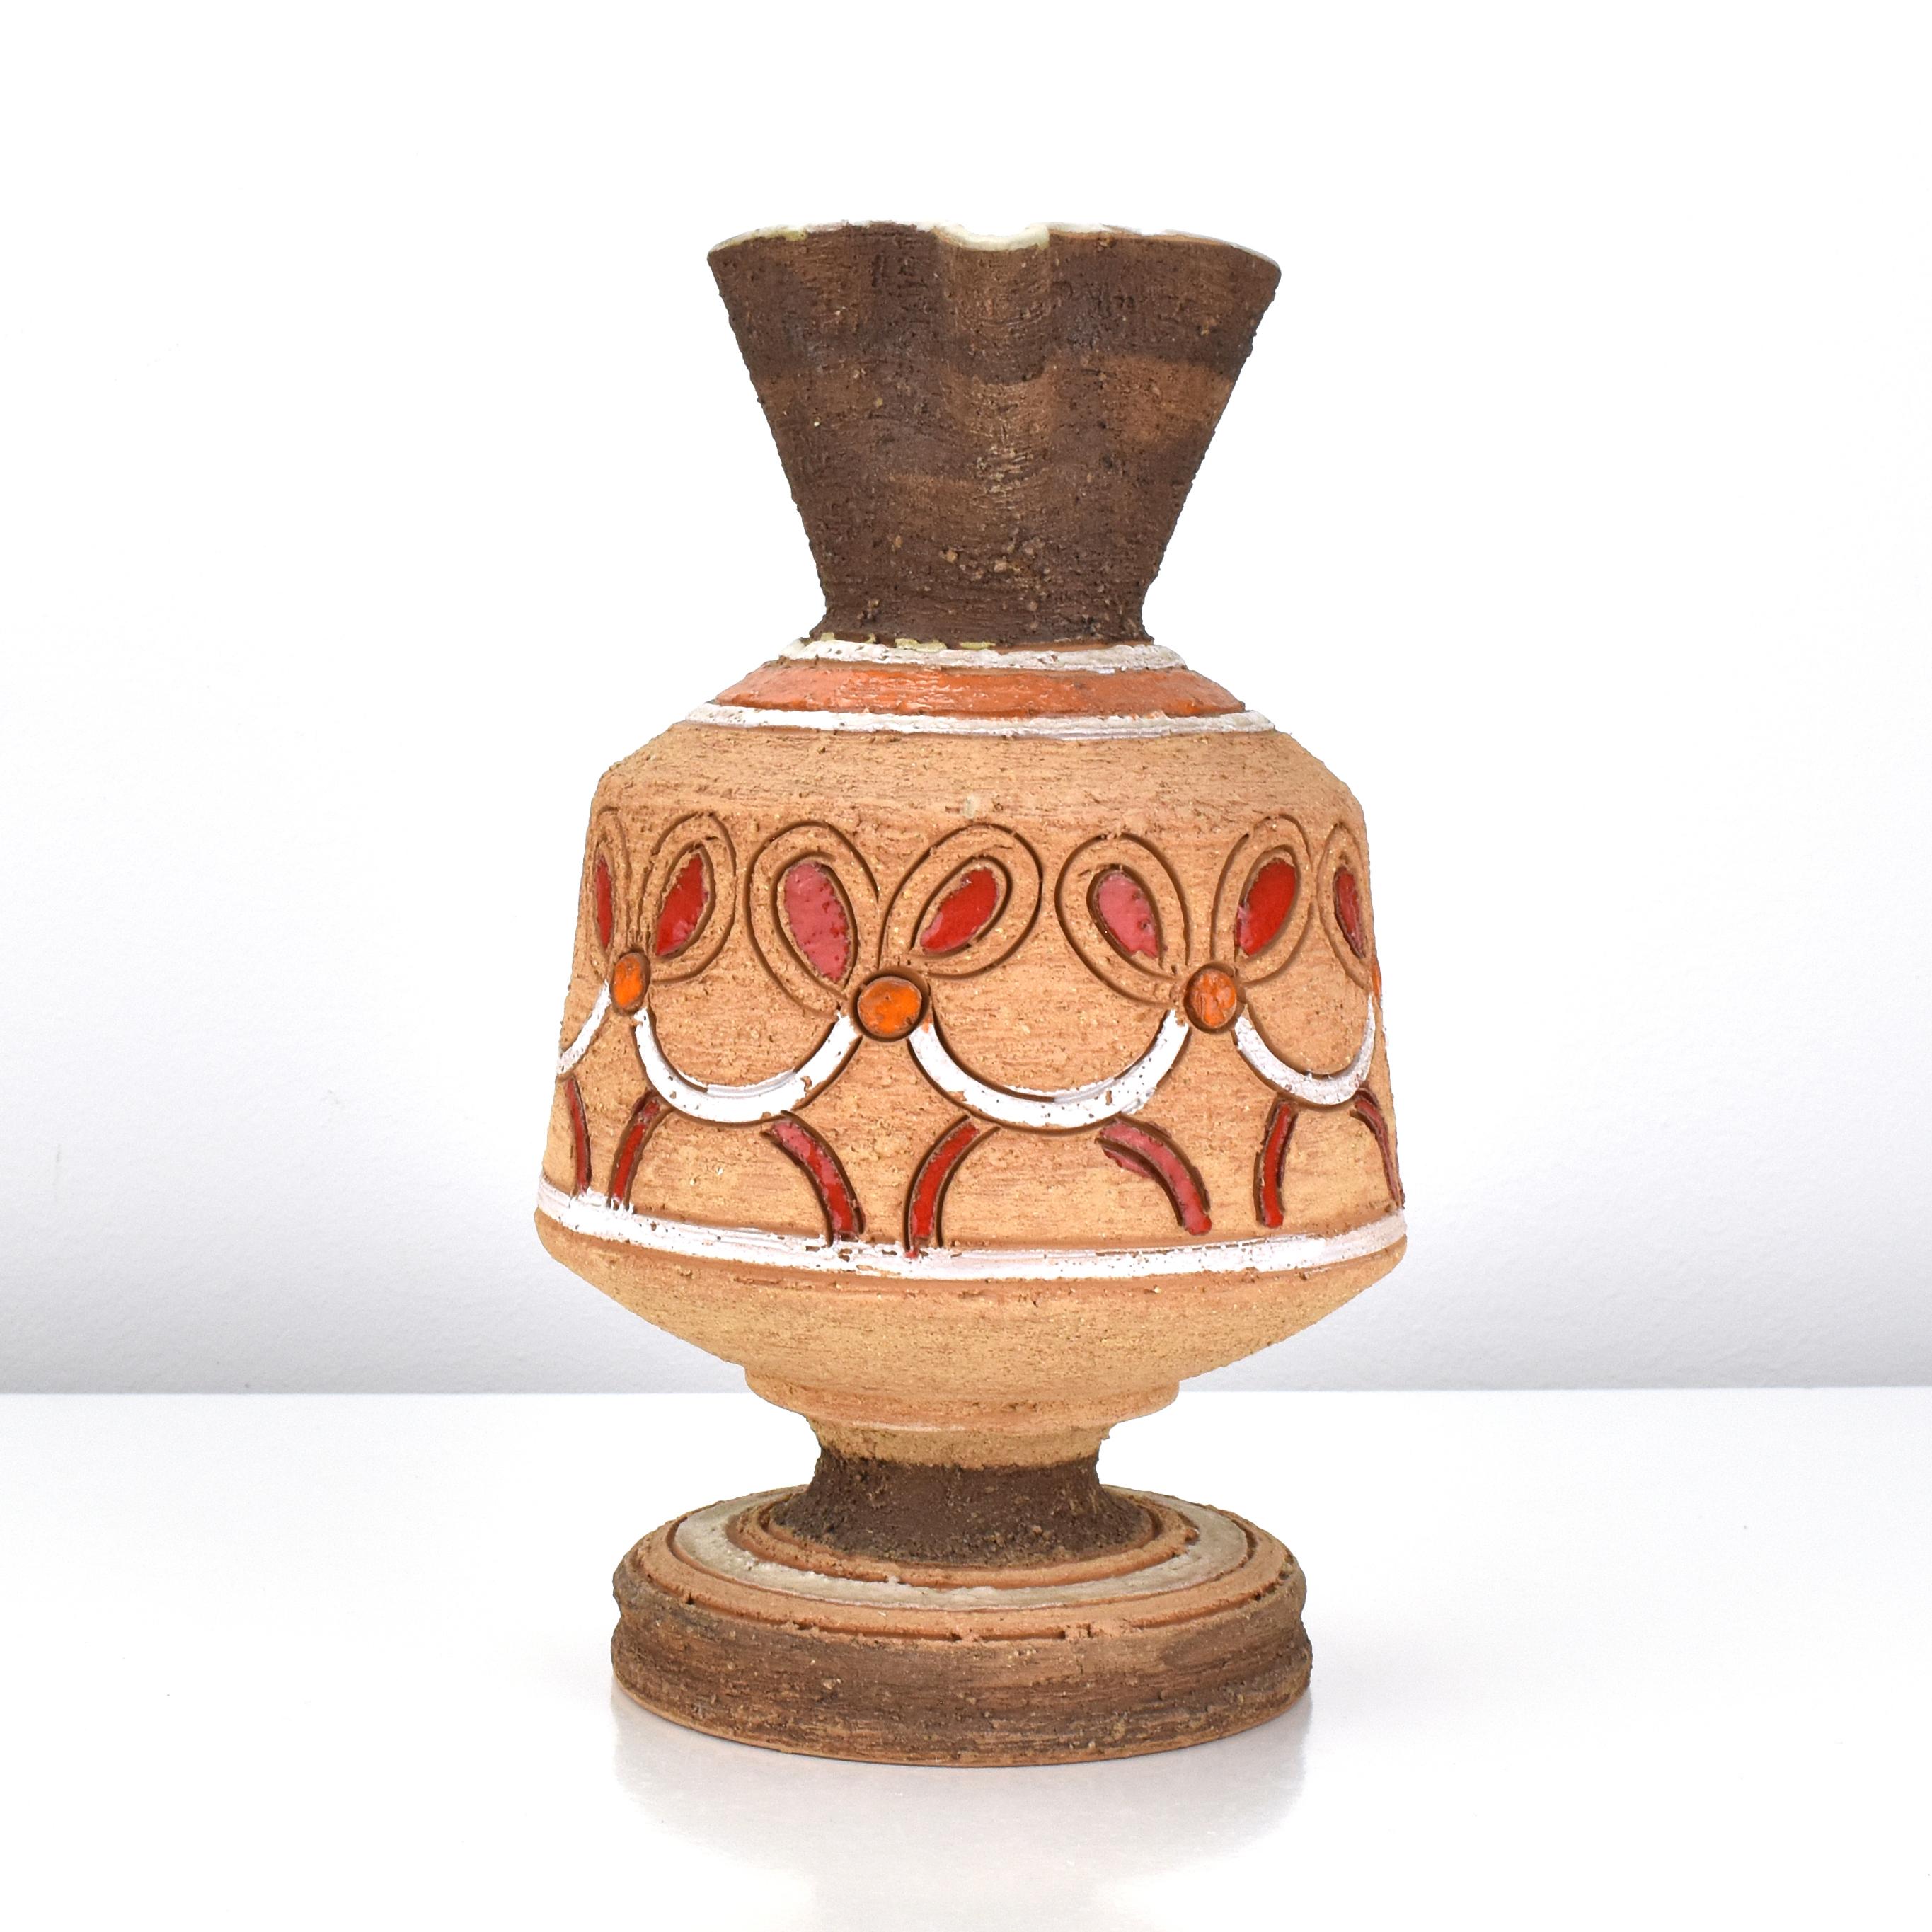 Hand-Crafted Fratelli Fanciullacci Pottery Vase Moroccan Pattern Design 1960s Italian Raymor For Sale